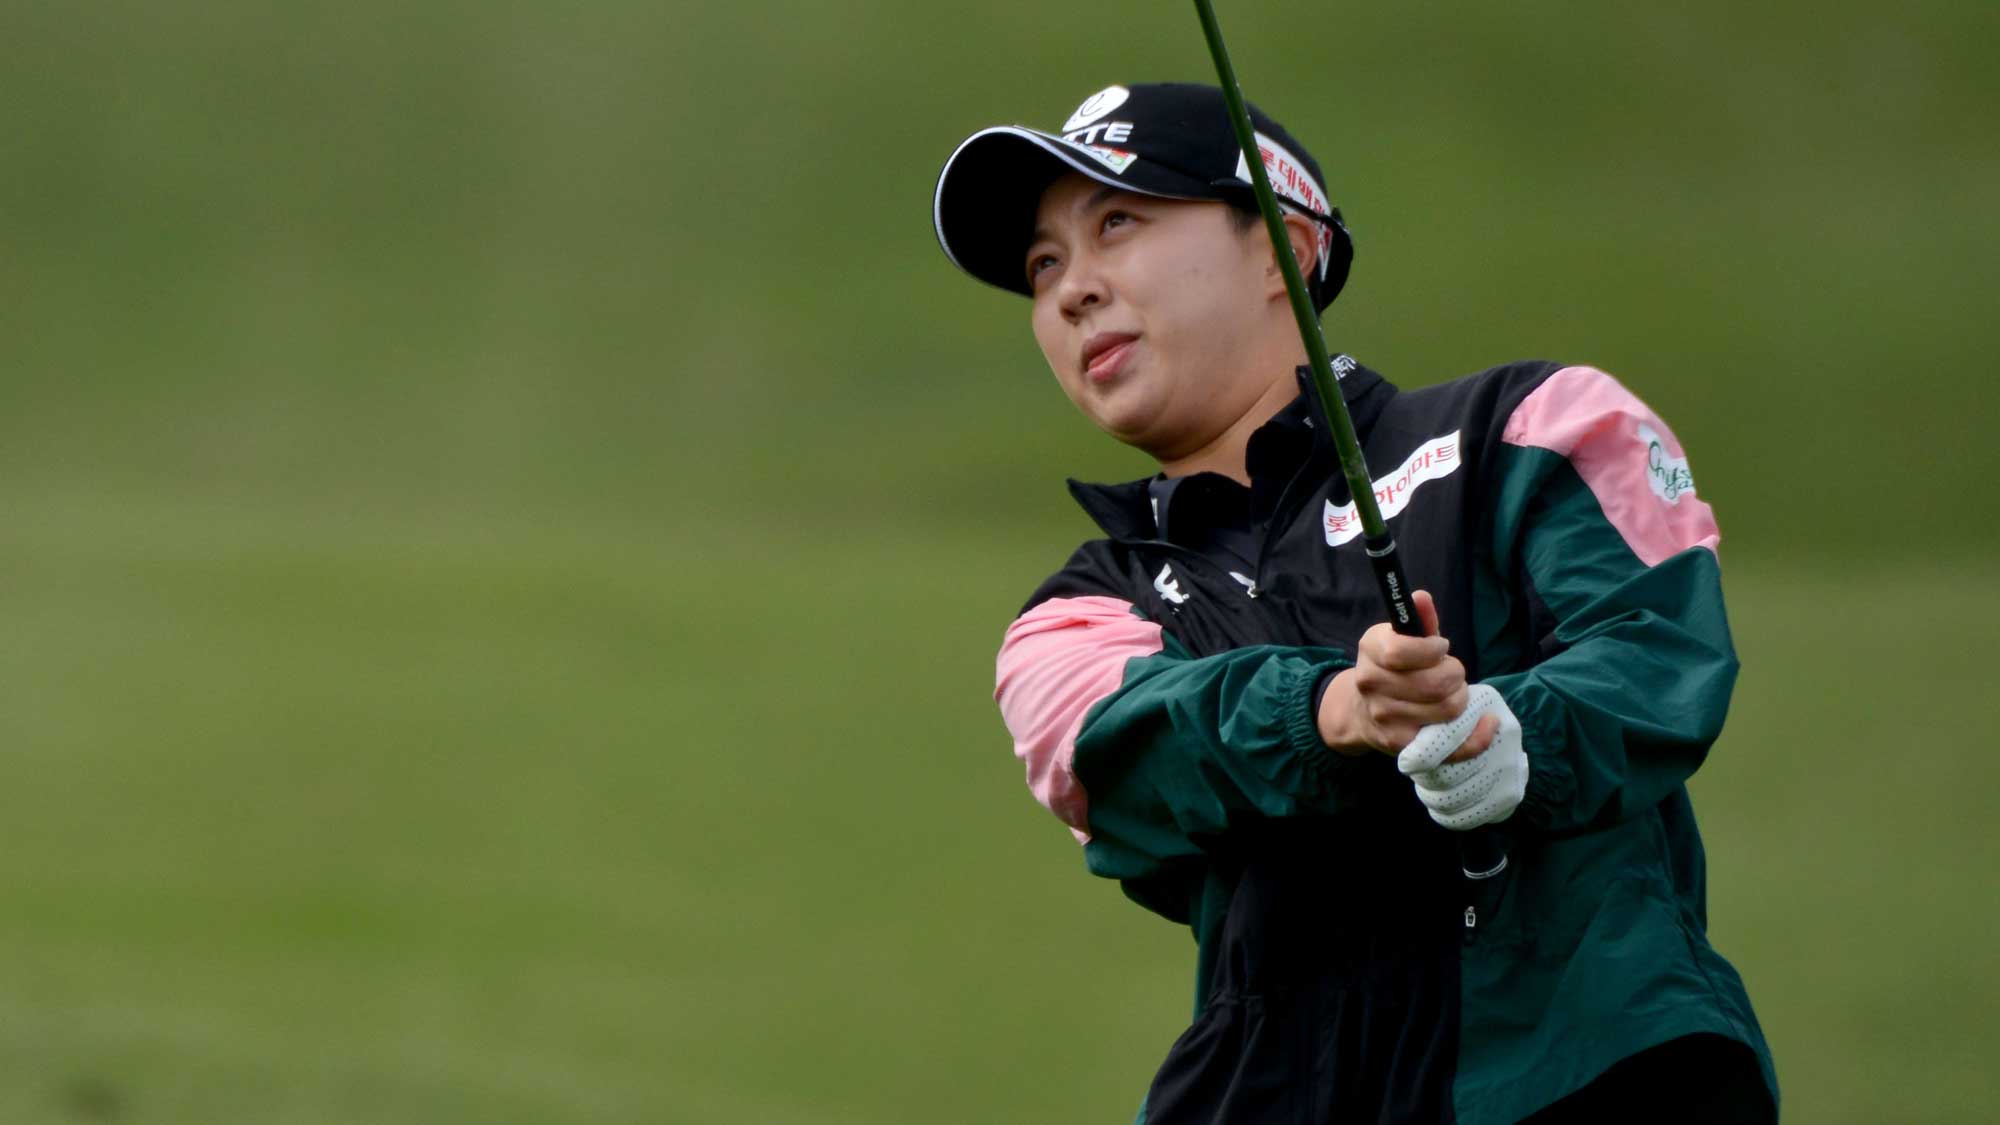 Hyo Joo Kim of South Korea plays during the Round One of the KIA Classic at the Aviara Golf Club on March 25, 2021 in Carlsbad, California.